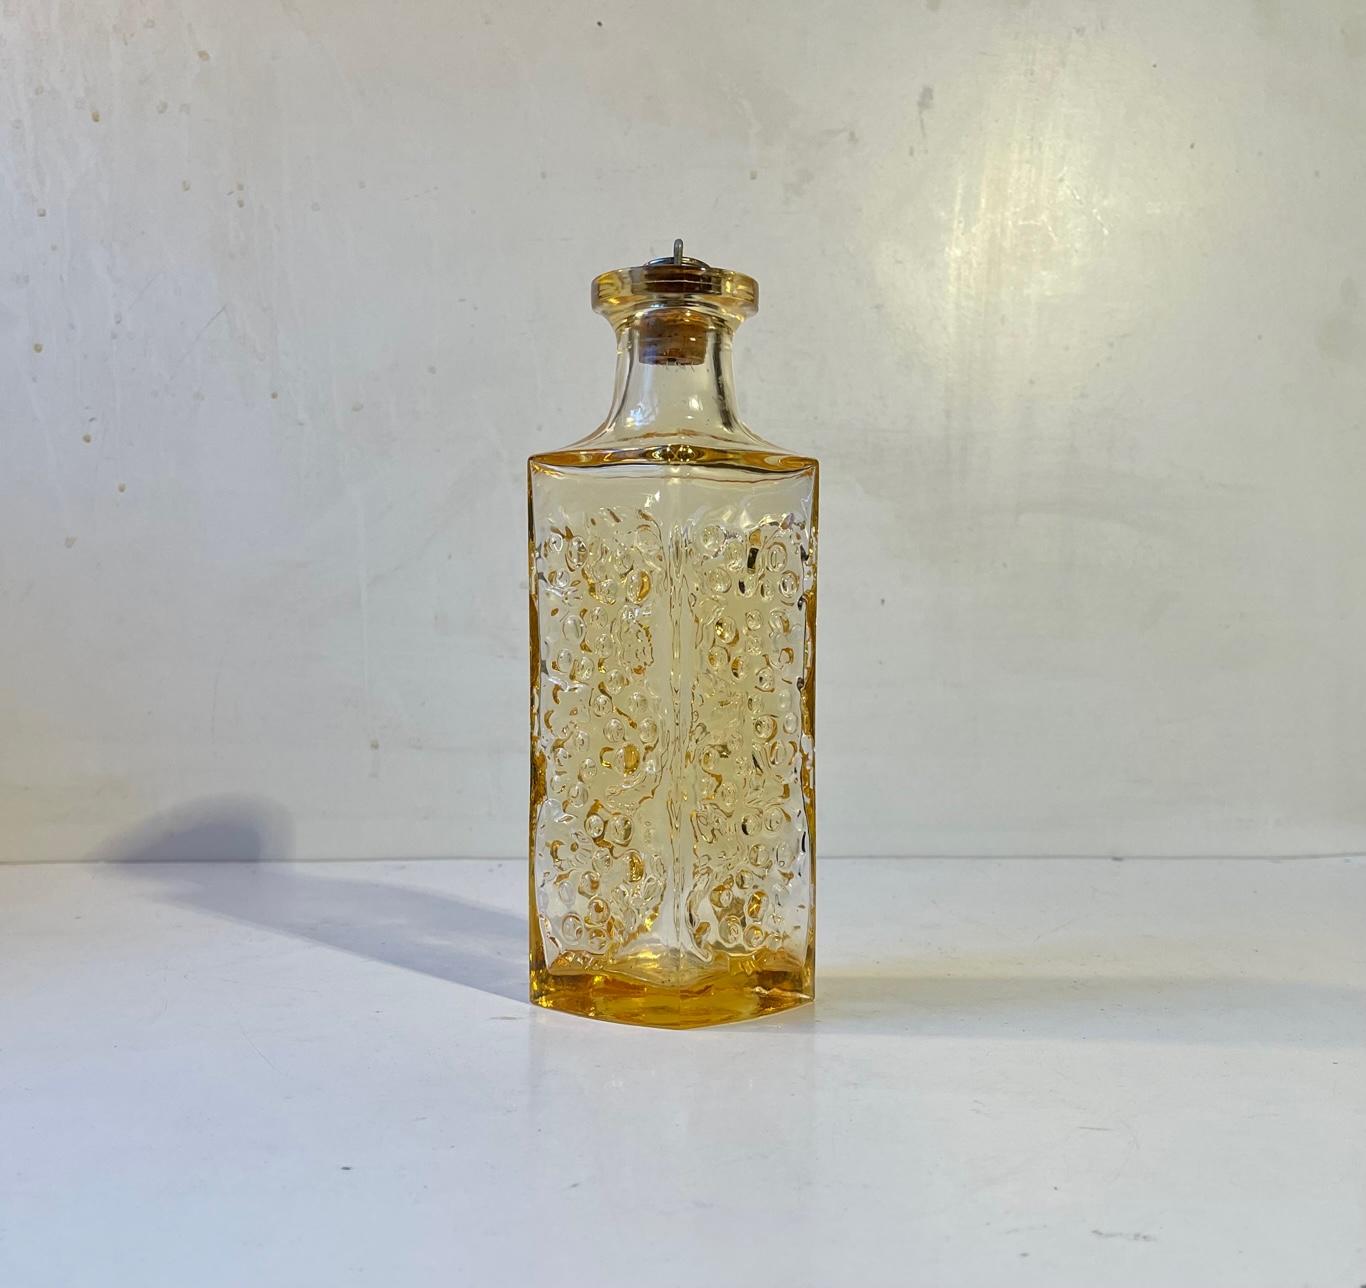 Small 0.5 liter liquor decanter in ocre-toned glass. It is made from handblown glass and its texture imitates the surface of the moon. It has its original stopper in brass and cork from Holmegaard. It was made at Holmegaard in Denmark during the